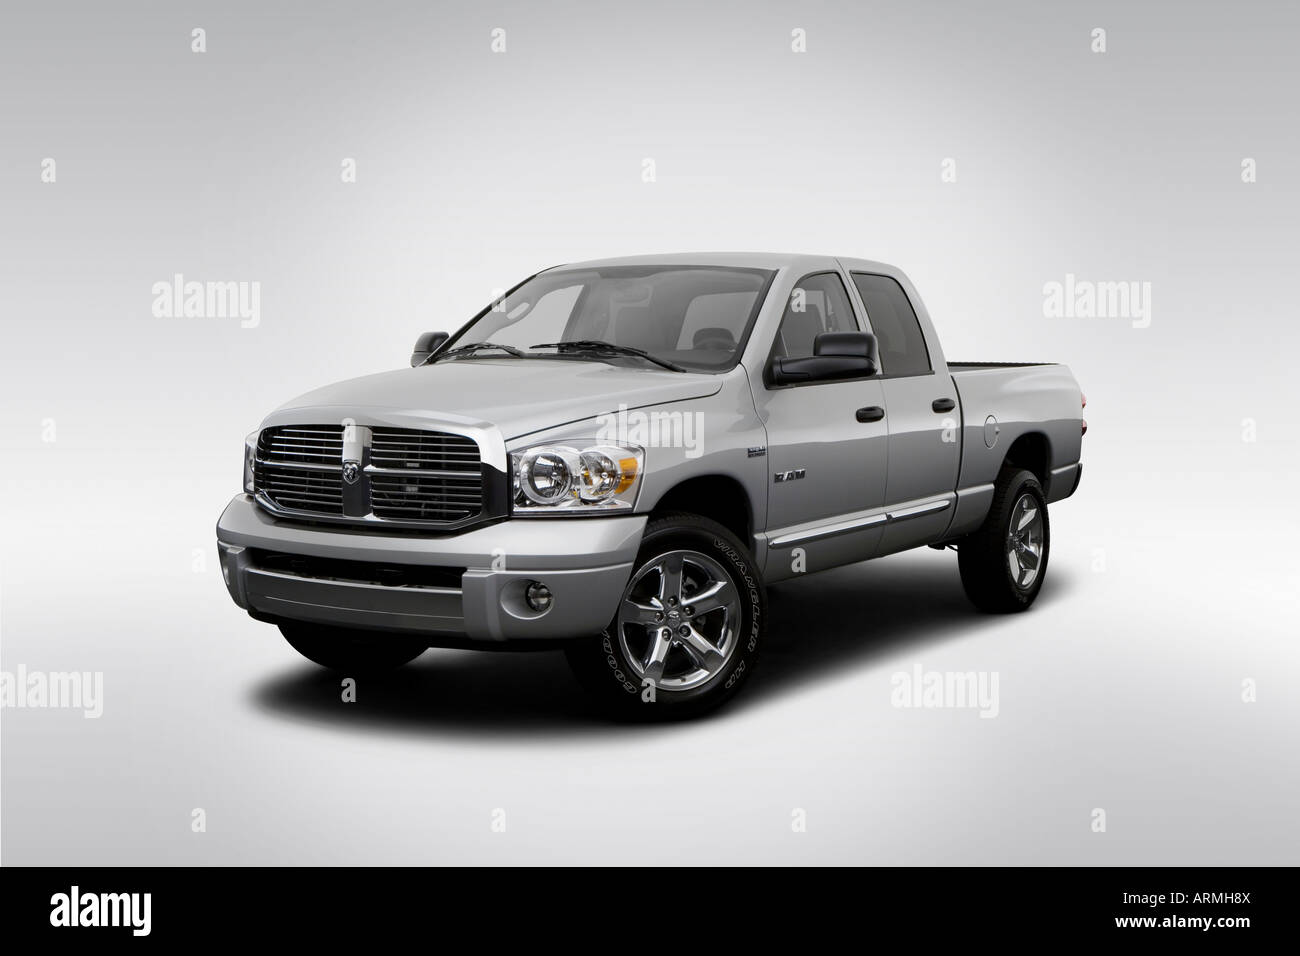 2008 Dodge Ram 1500 Laramie in Silver - Front angle view Stock Photo - Alamy